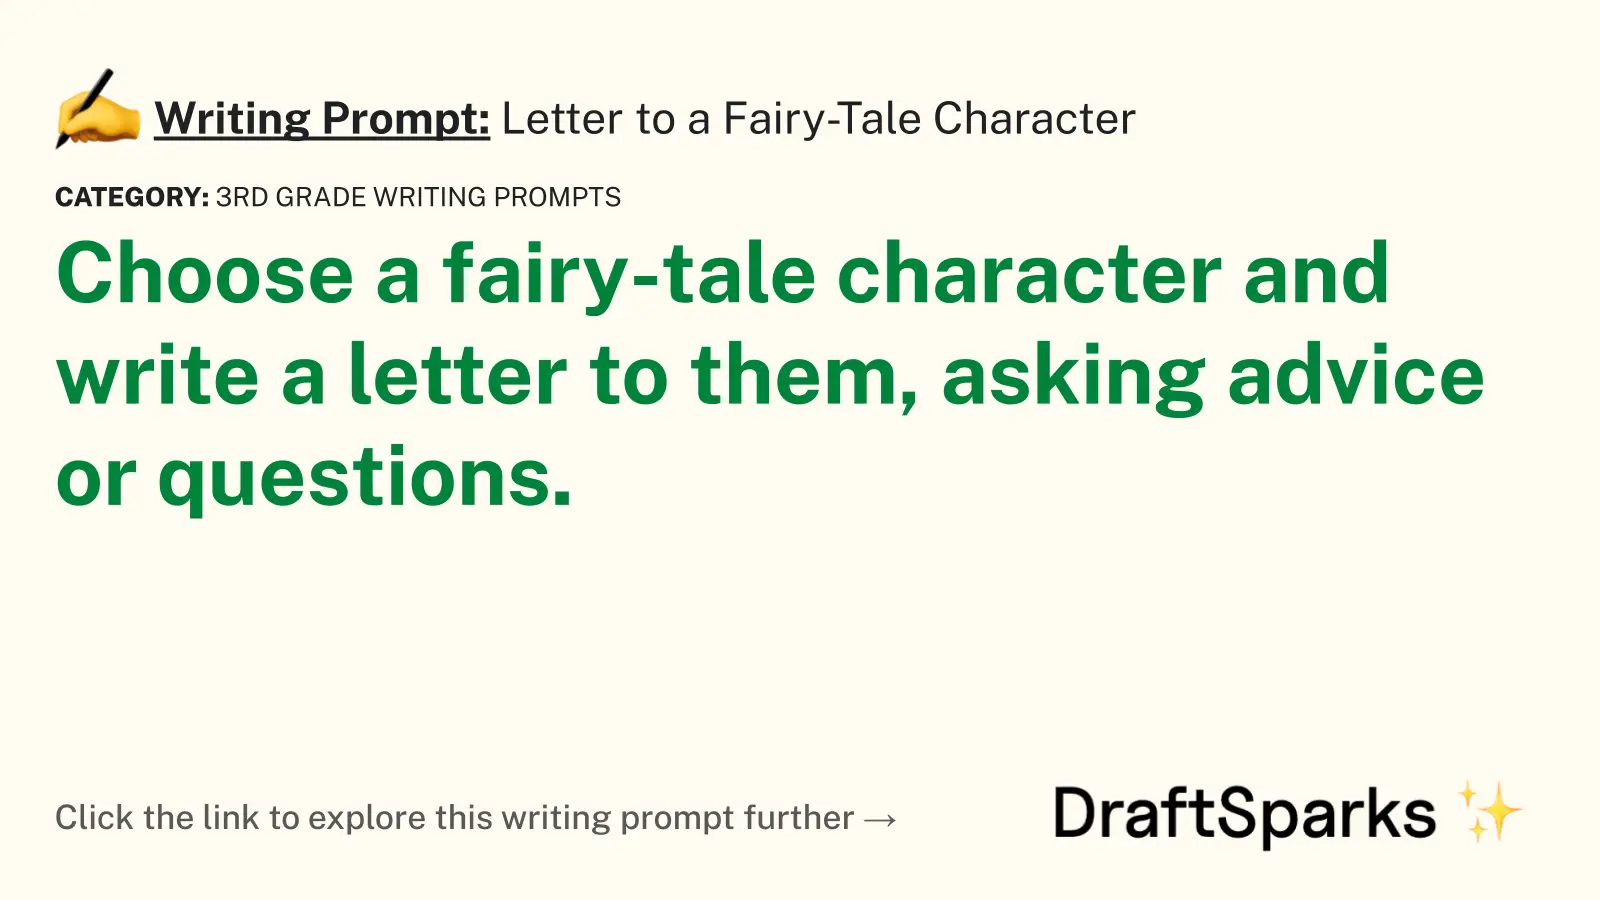 Letter to a Fairy-Tale Character